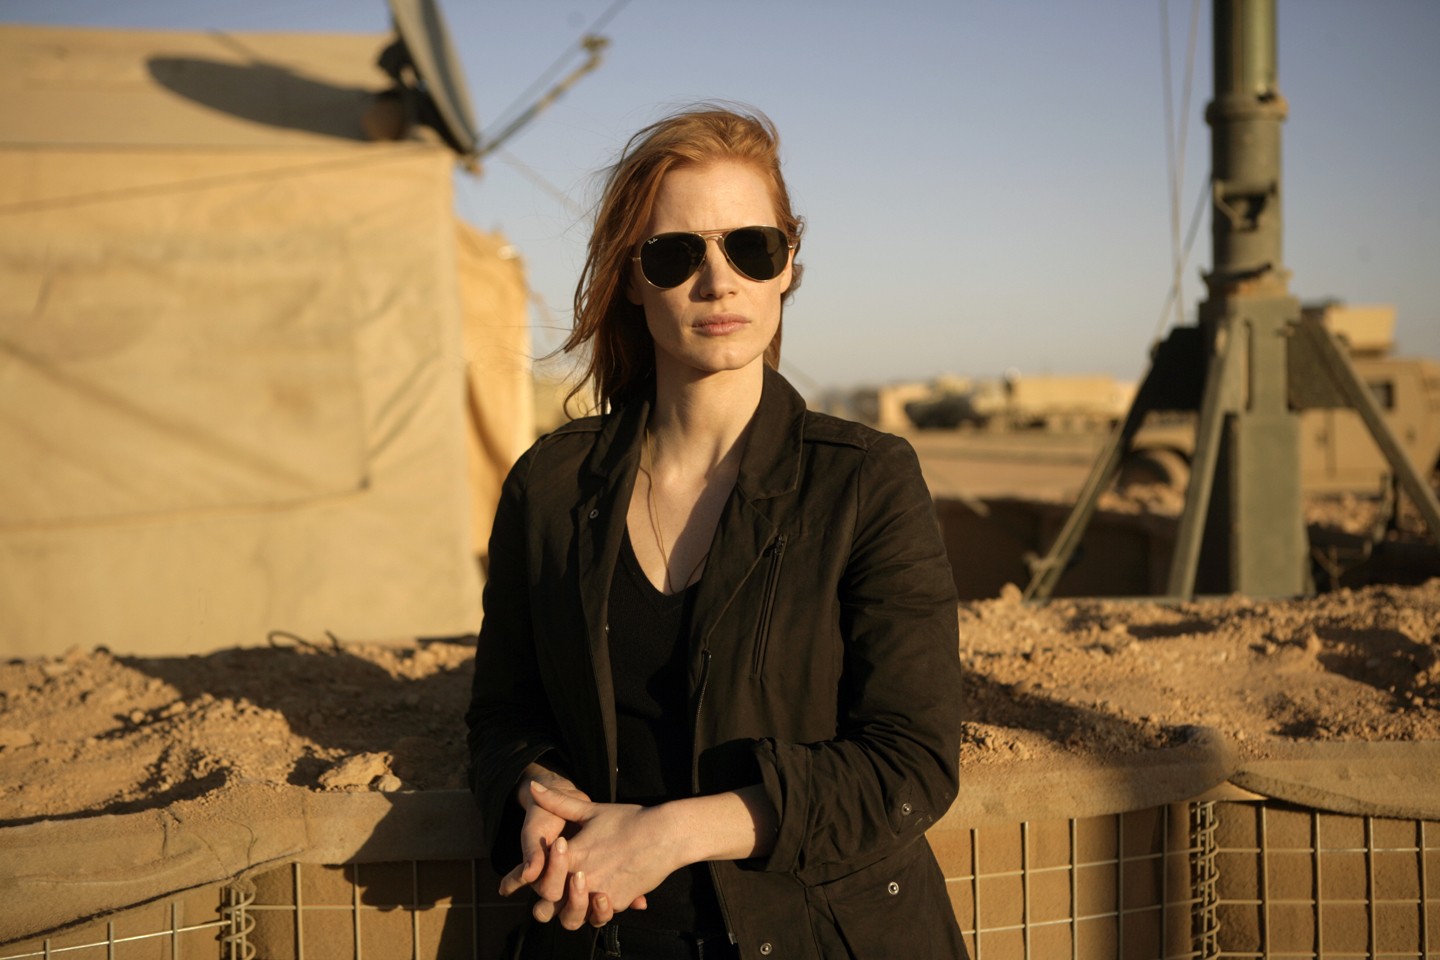 Stationed in a covert base overseas, Jessica Chastain plays a member of the elite team of spies and military operatives who secretly devoted themselves to finding Osama Bin Laden in Columbia Pictures' electrifying new thriller directed by Kathryn Bigelow, (Foto: jonathanolley.co.uk)